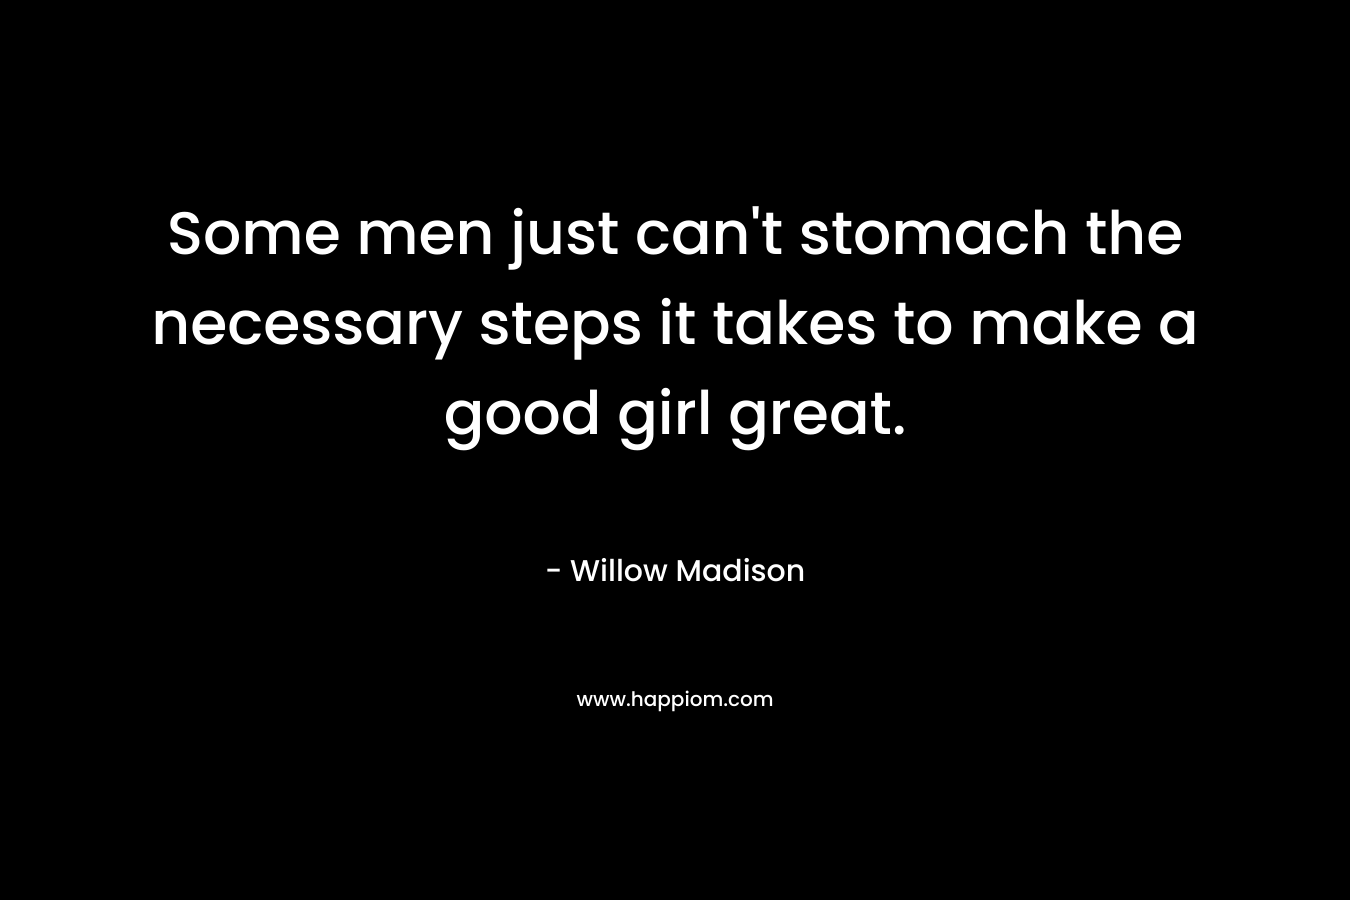 Some men just can’t stomach the necessary steps it takes to make a good girl great. – Willow Madison